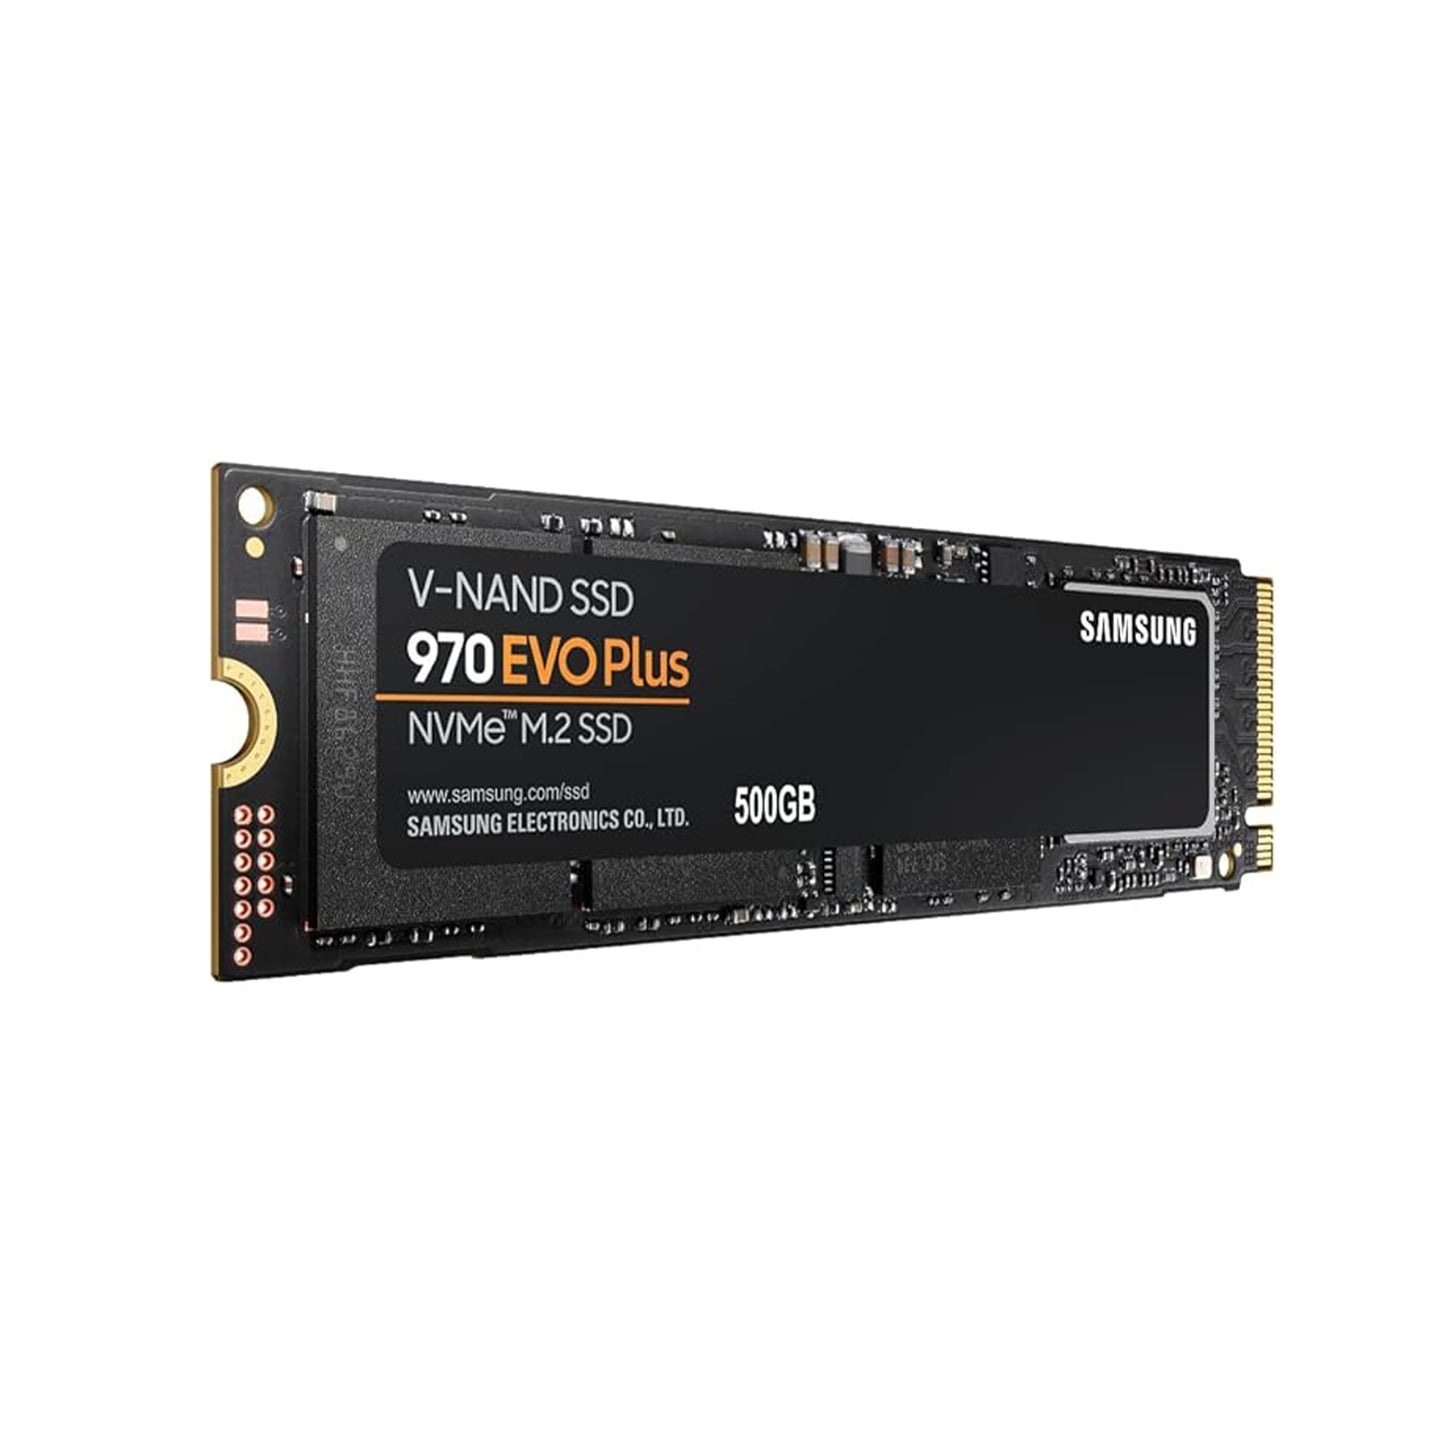 SAMSUNG 980 SSD 250GB PCle 3.0x4, NVMe M.2 2280, Internal Solid State Drive, Storage for PC, Laptops, Gaming and More, HMB Technology, Intelligent Turbowrite, Speeds up-to 3,500MB/s, MZ-V8V250B/AM